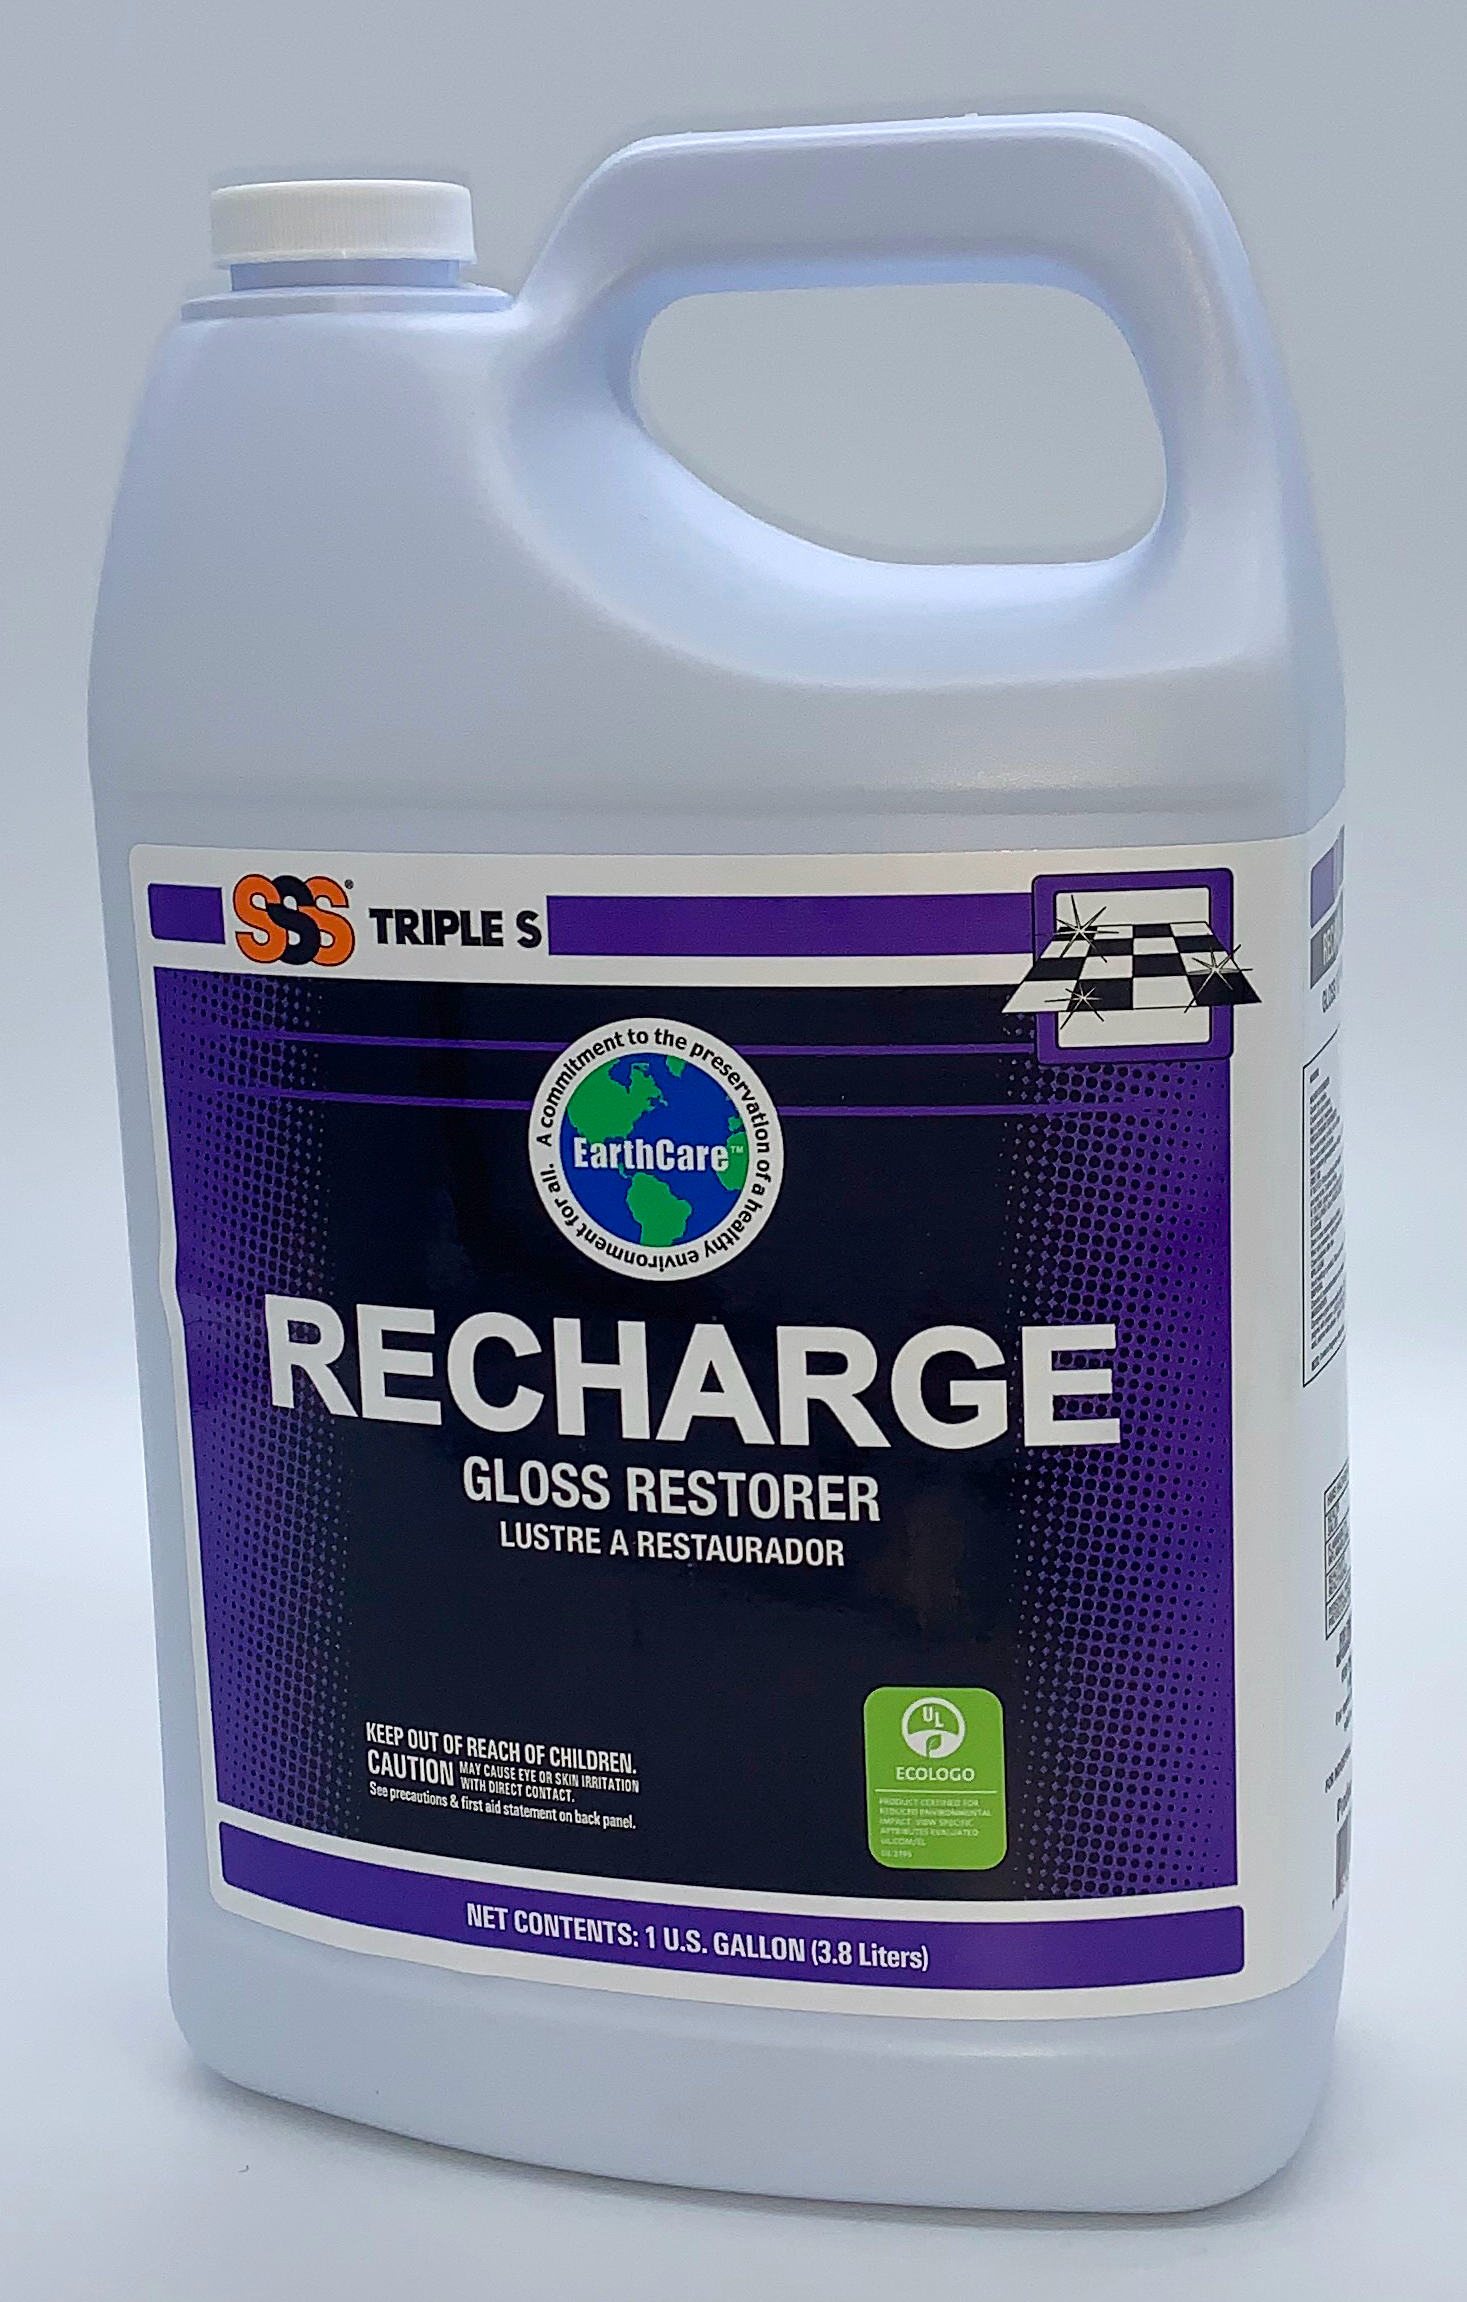 Triple-S 'Recharge' Gloss Restorer for all floors, including synthetic flooring